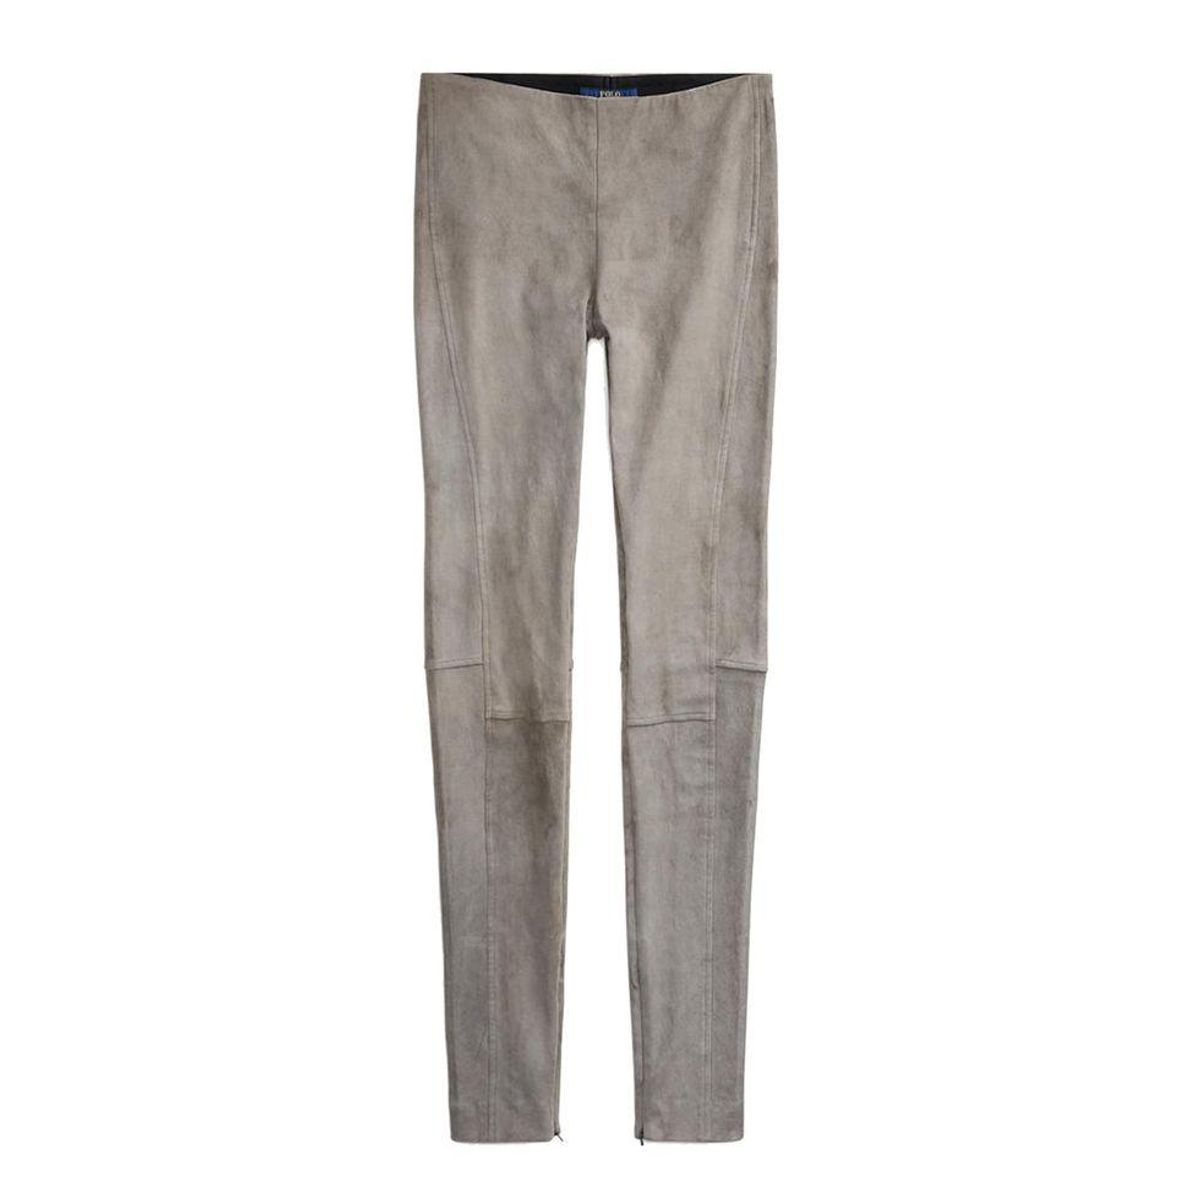 polo ralph lauren leland stretch suede skinny pants